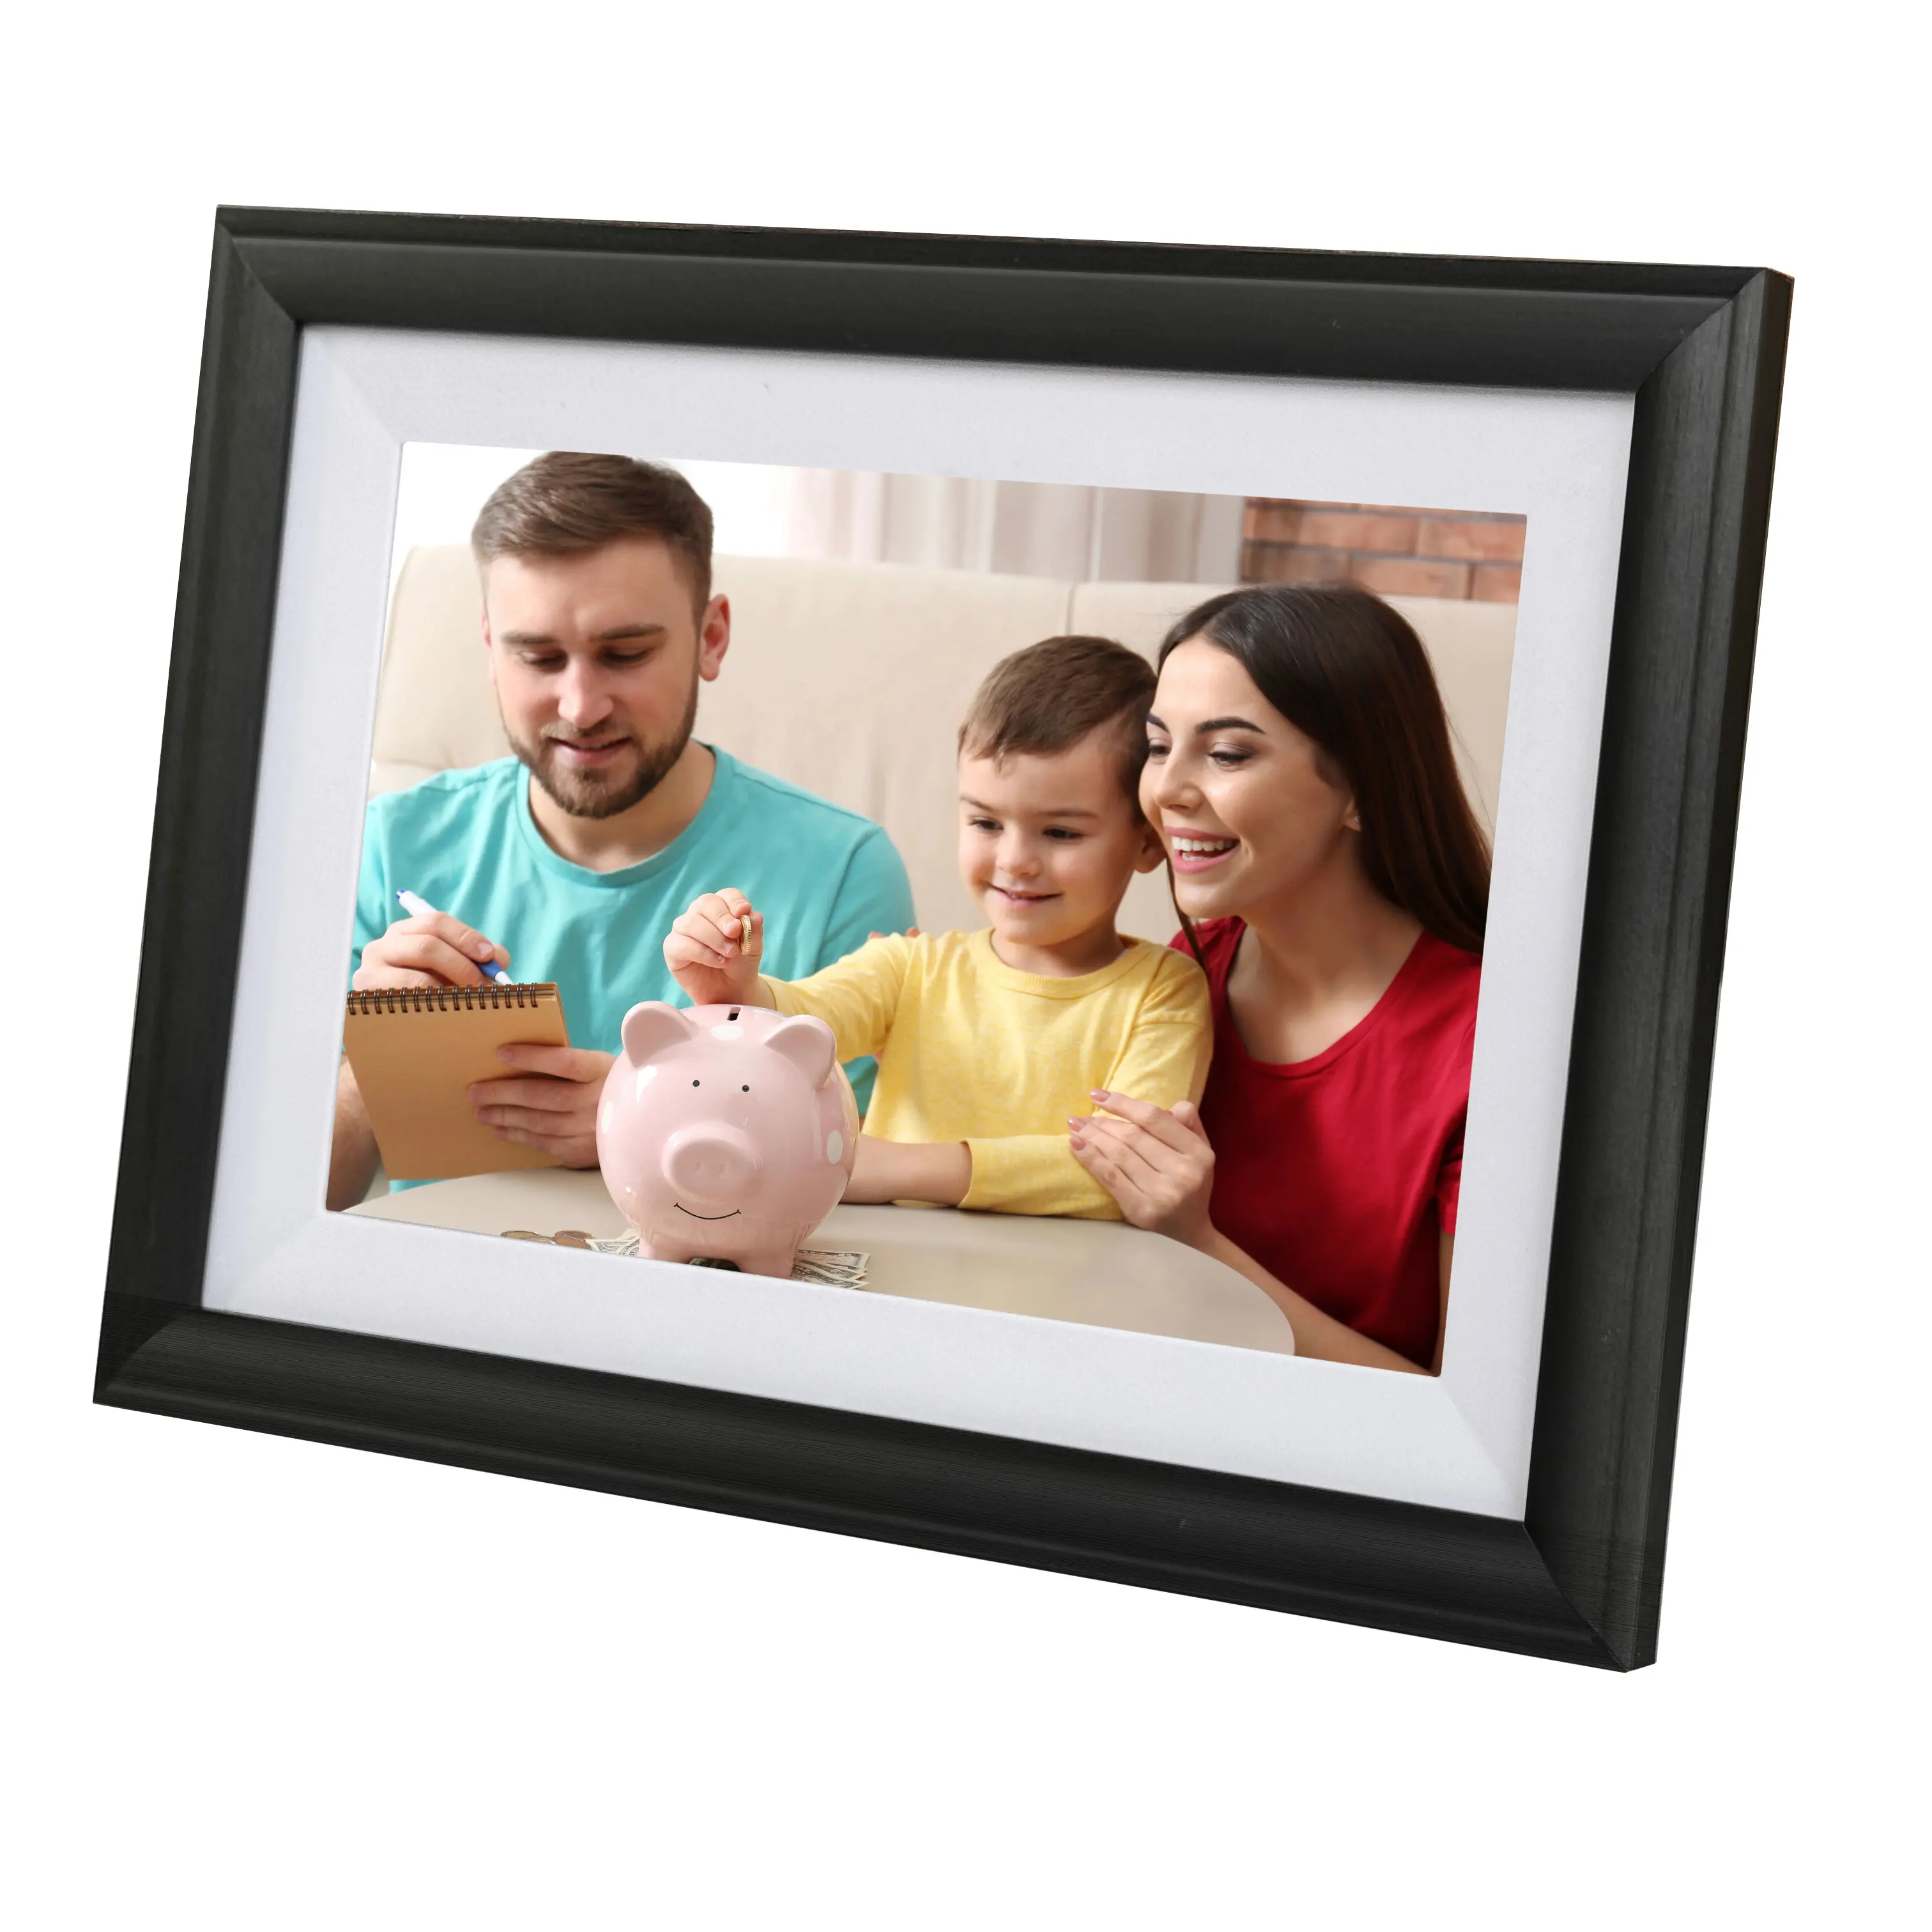 Digital Picture Frame WiFi 10 inch Touch Screen Digital Photo Frame with 32GB Storage Share Photos via App  Classic 10 Black